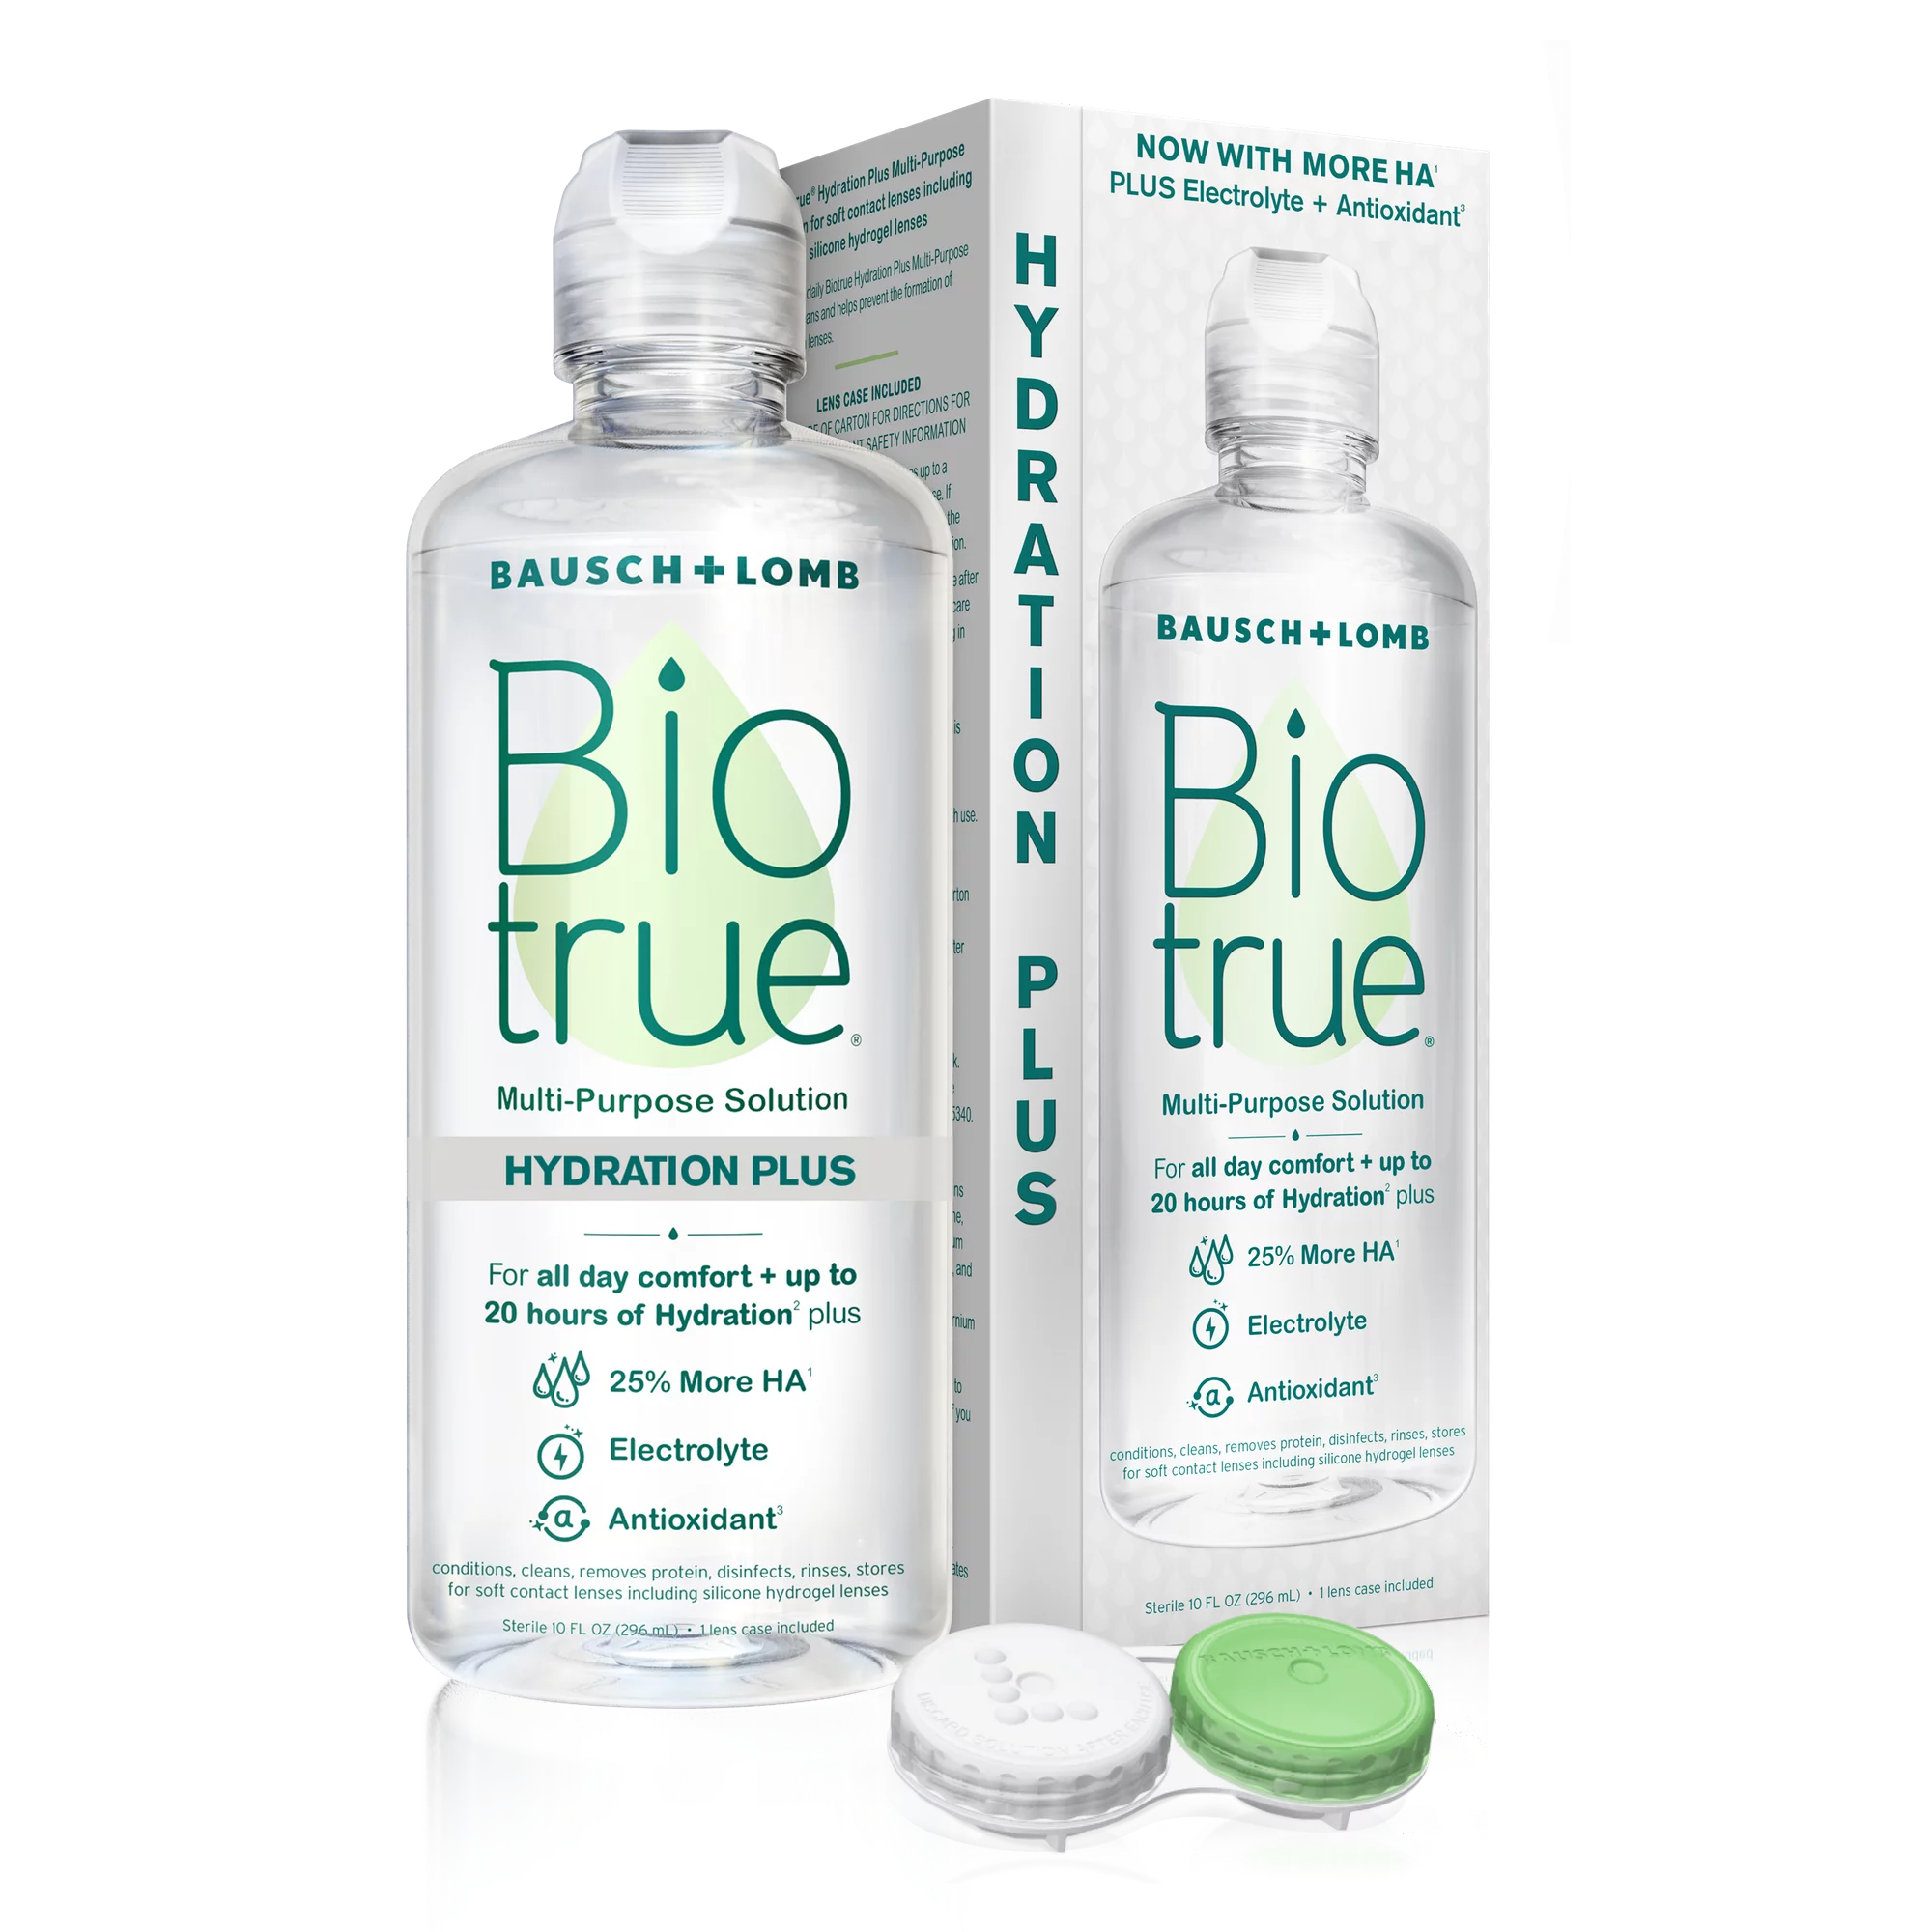 See your world in a whole new light with Biotrue Multi-Purpose Solution Original or Hydration Plus!